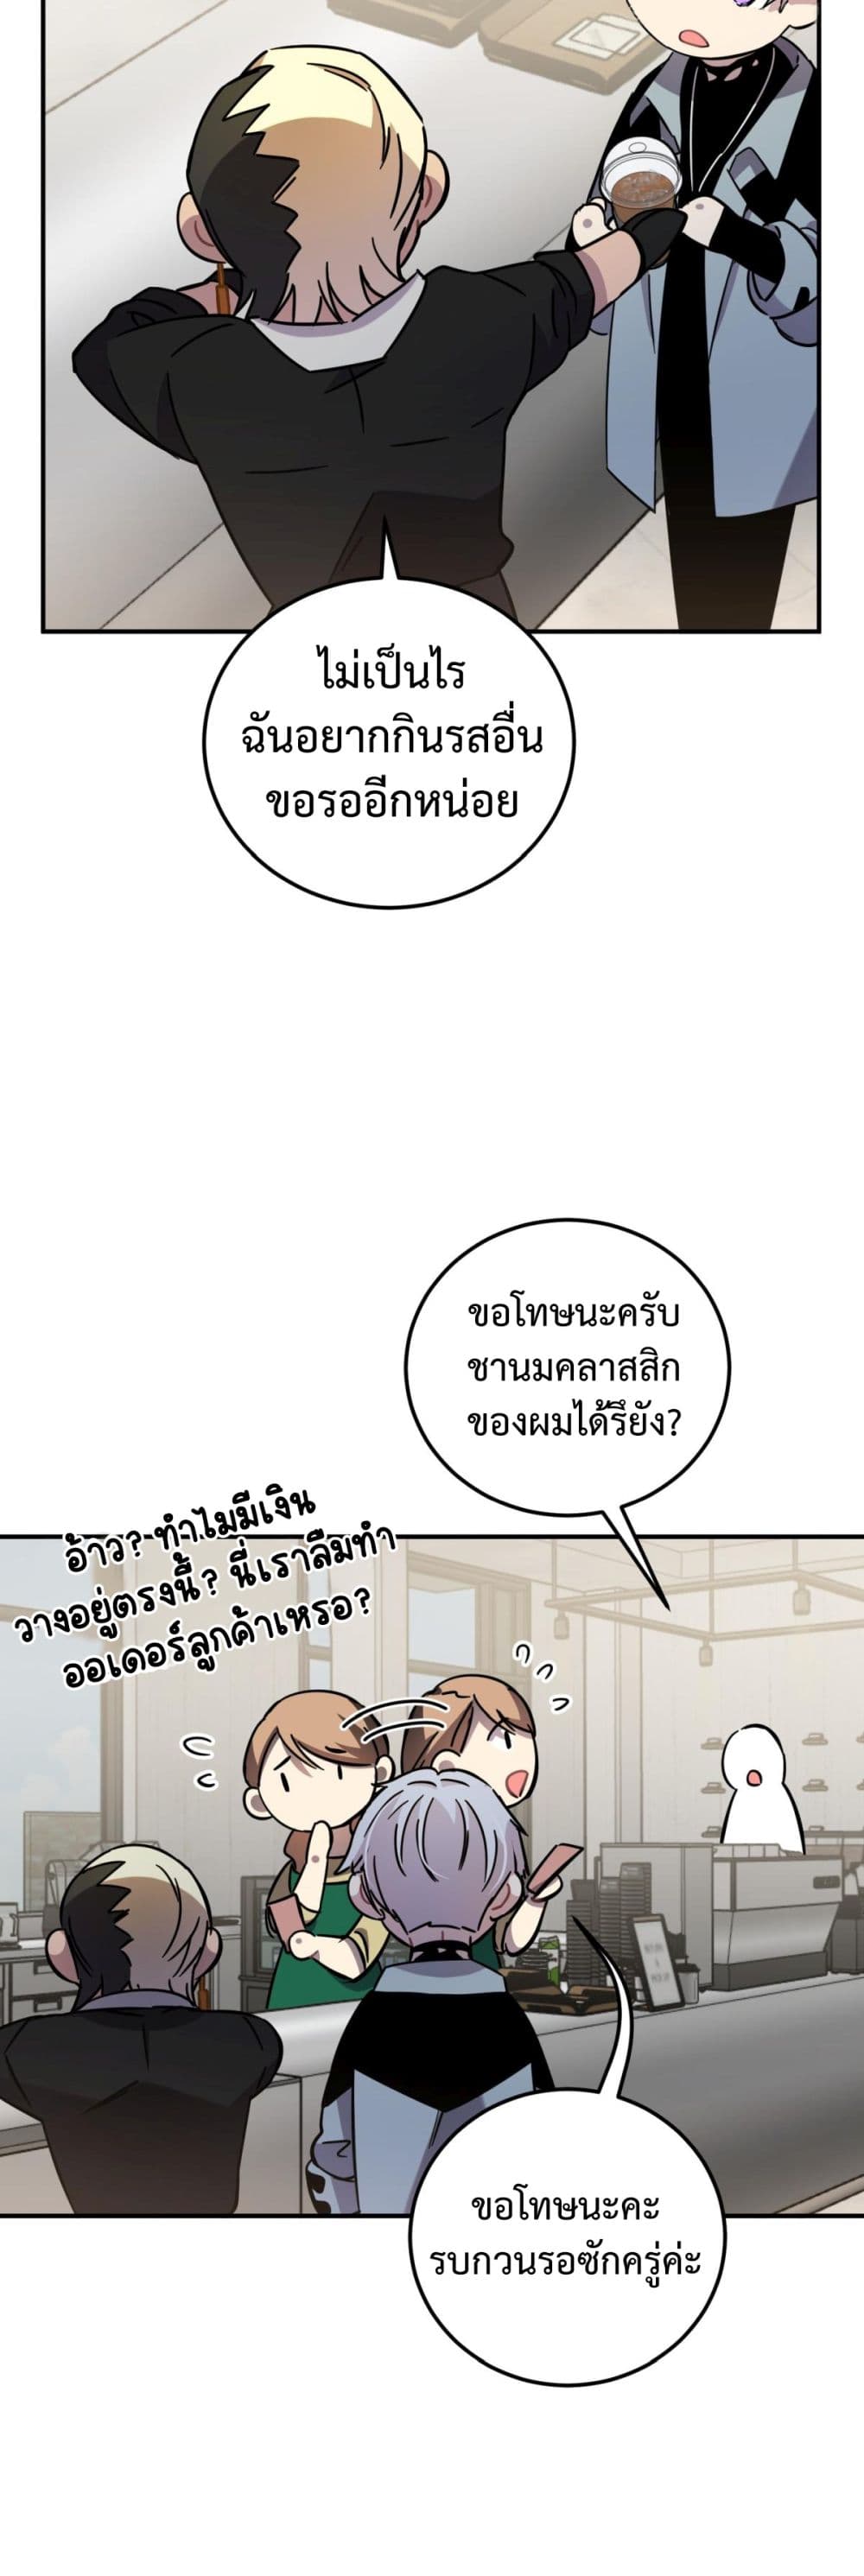 Anemone Dead or Alive ตอนที่ 8.5 (5)